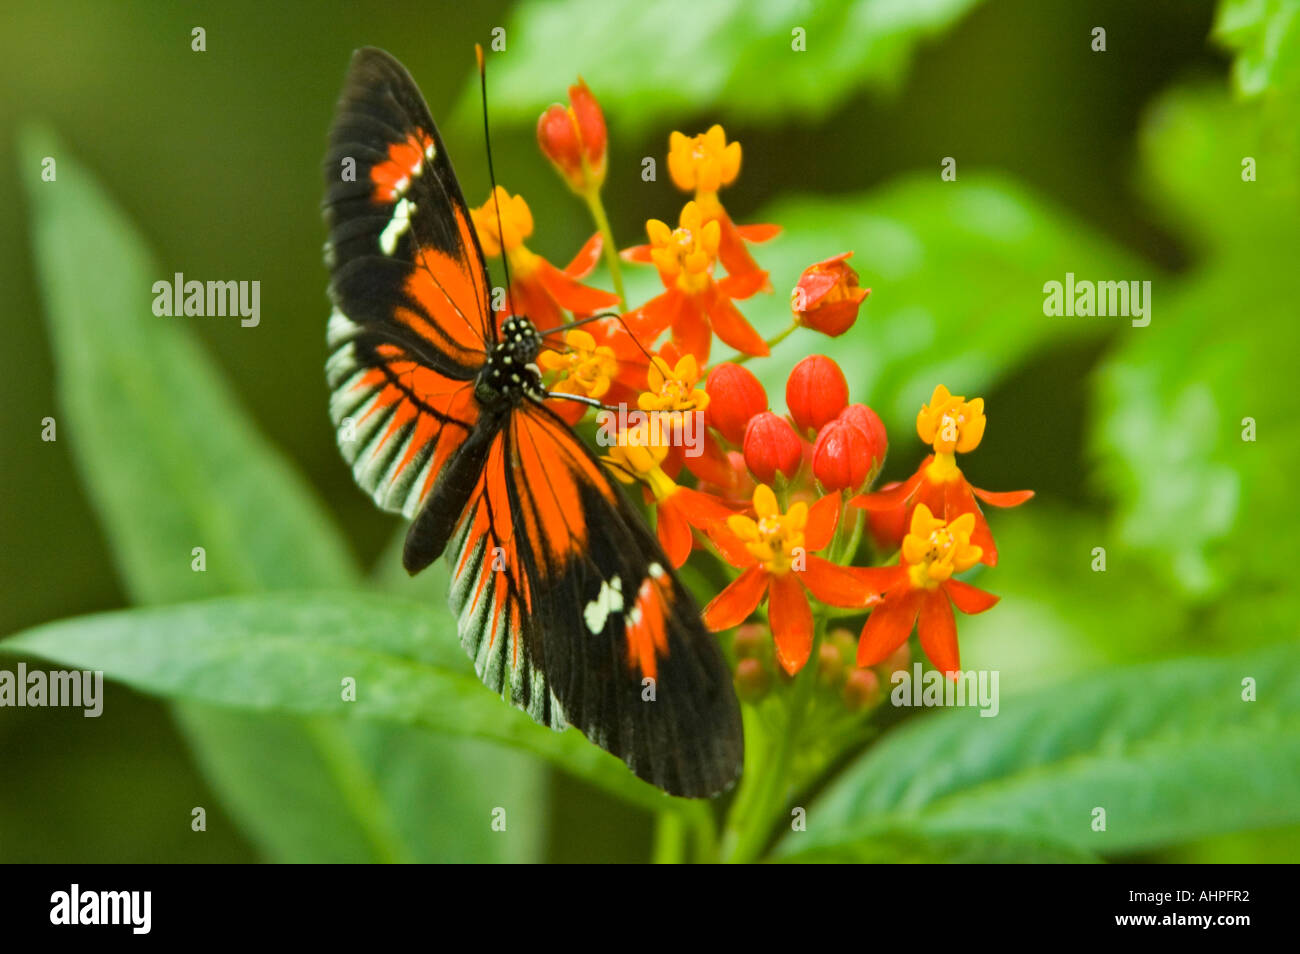 Horizontal close up of a small Postman Longwing butterfly [Heliconius Melpomene] feeding on a small red flower Stock Photo